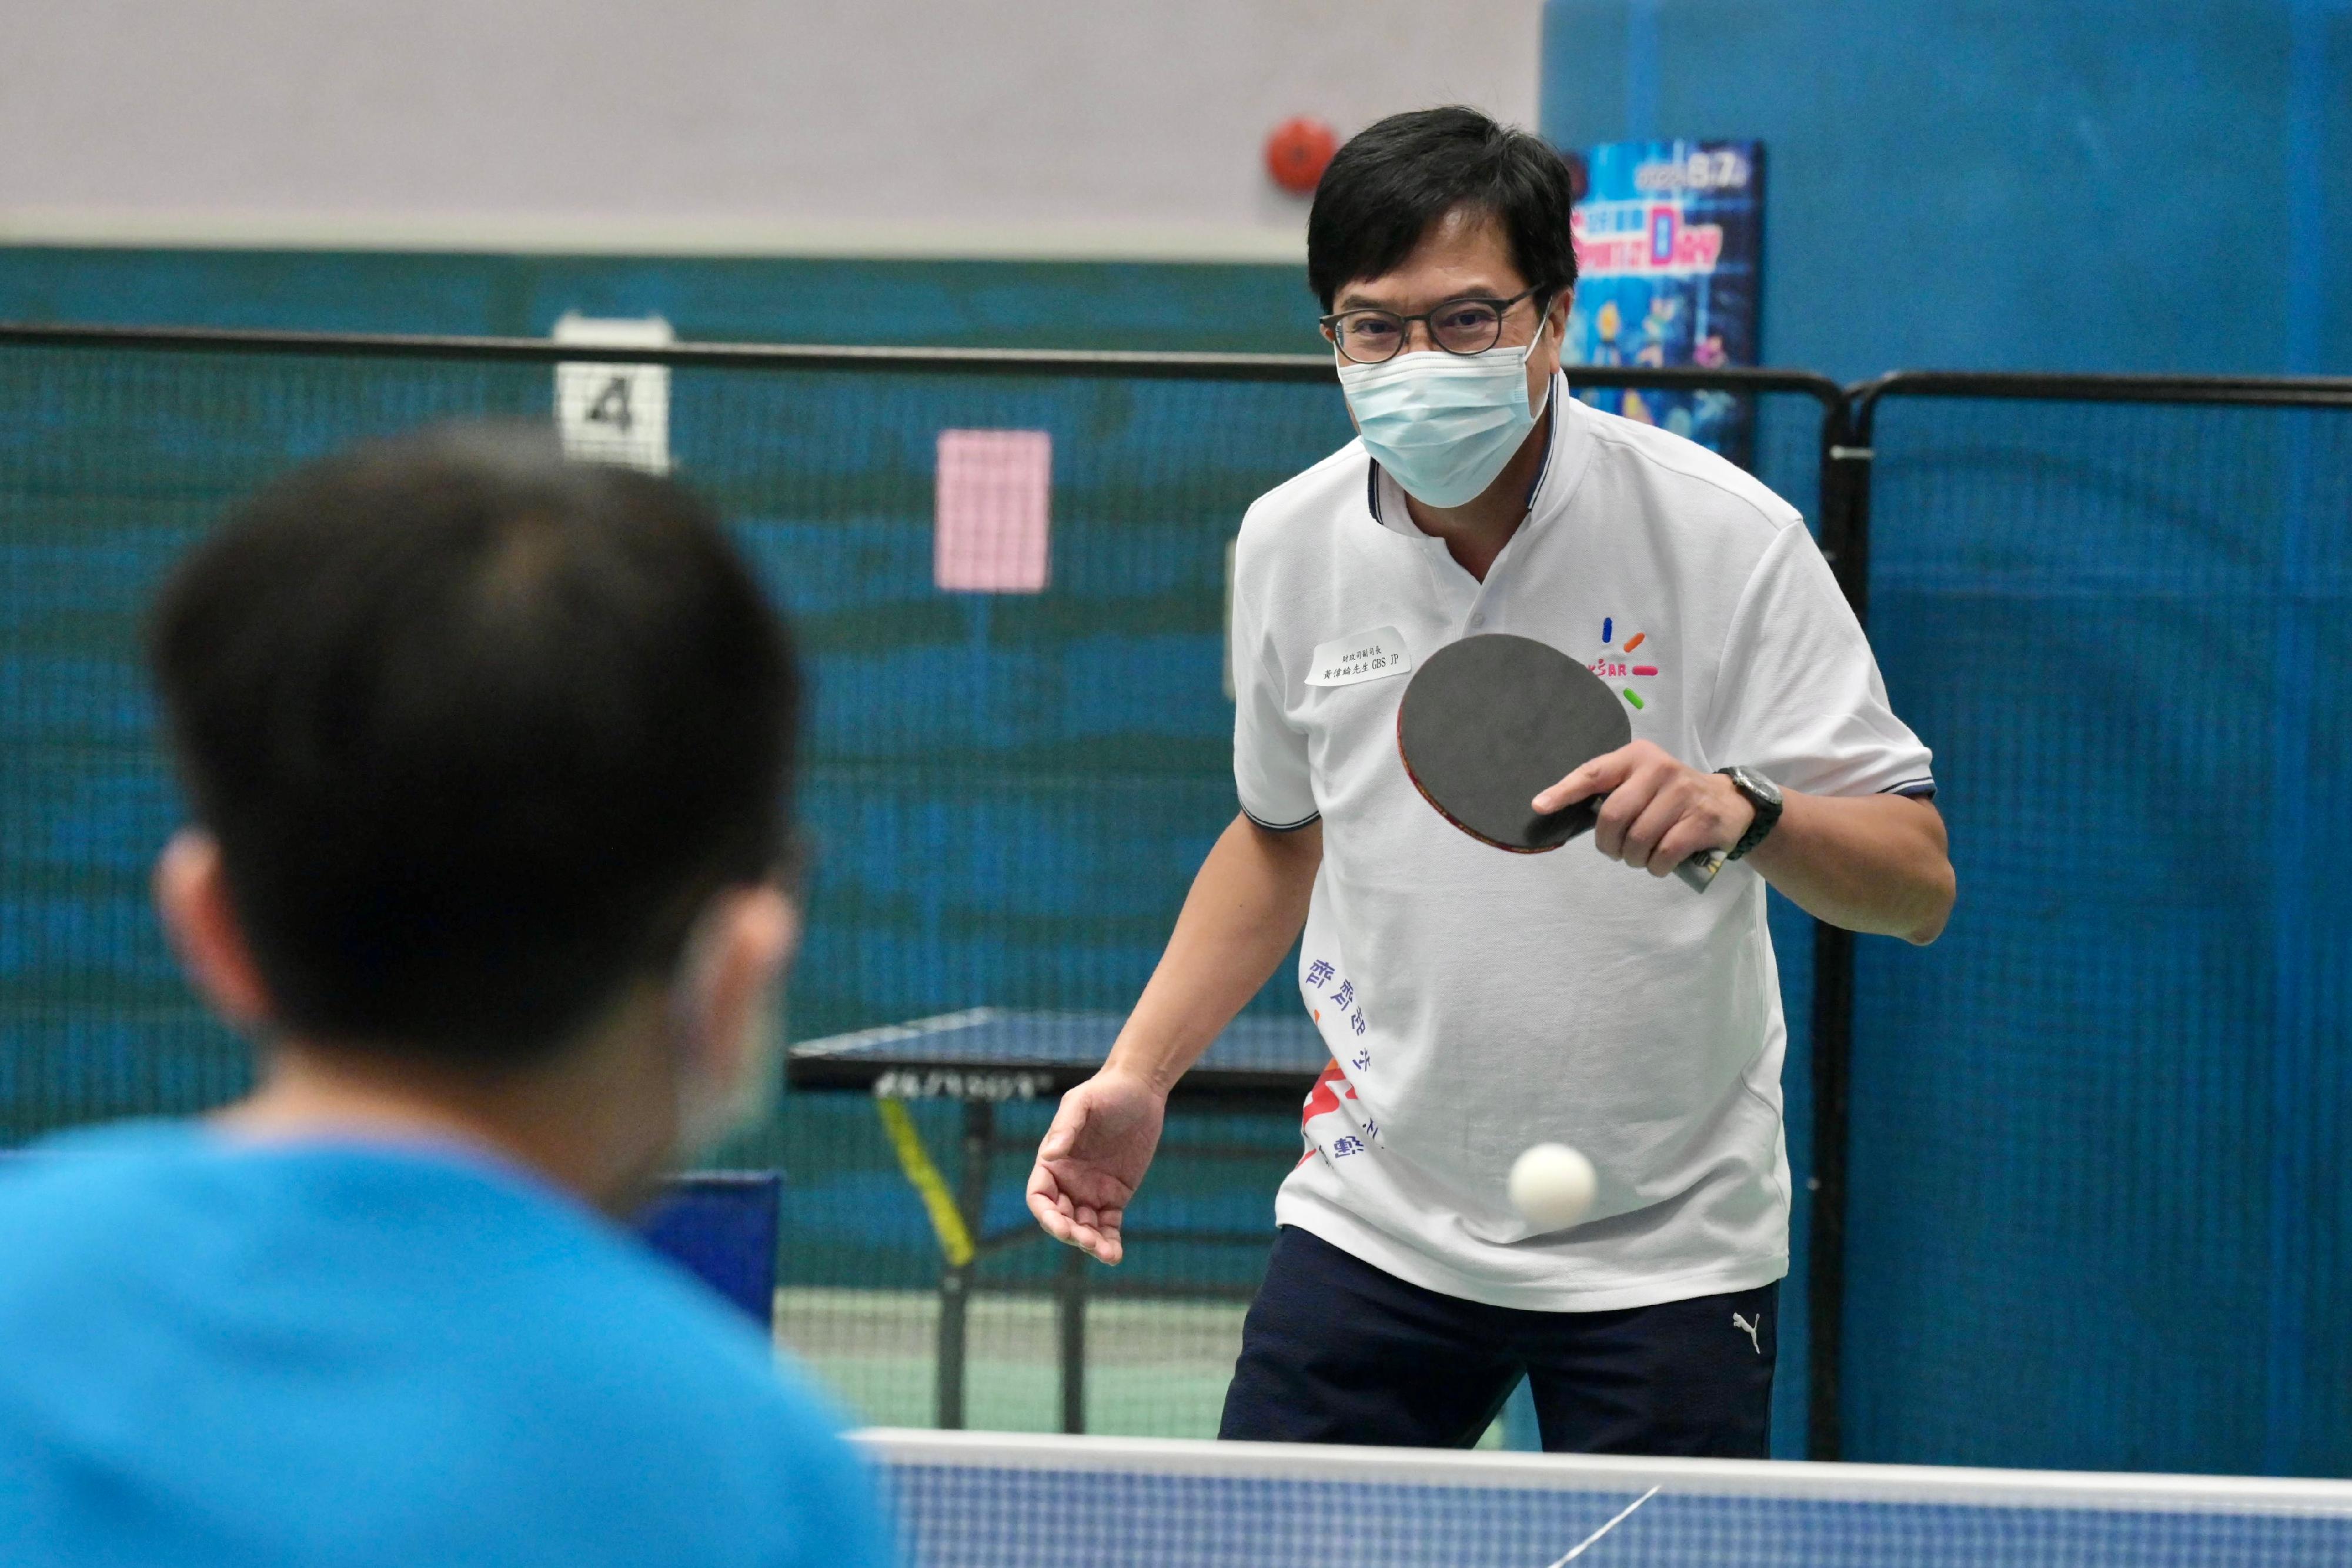 The Deputy Financial Secretary, Mr Michael Wong, today (August 7) plays table tennis with the public participating in the Sport for All Day 2022 at the Island East Sports Centre.